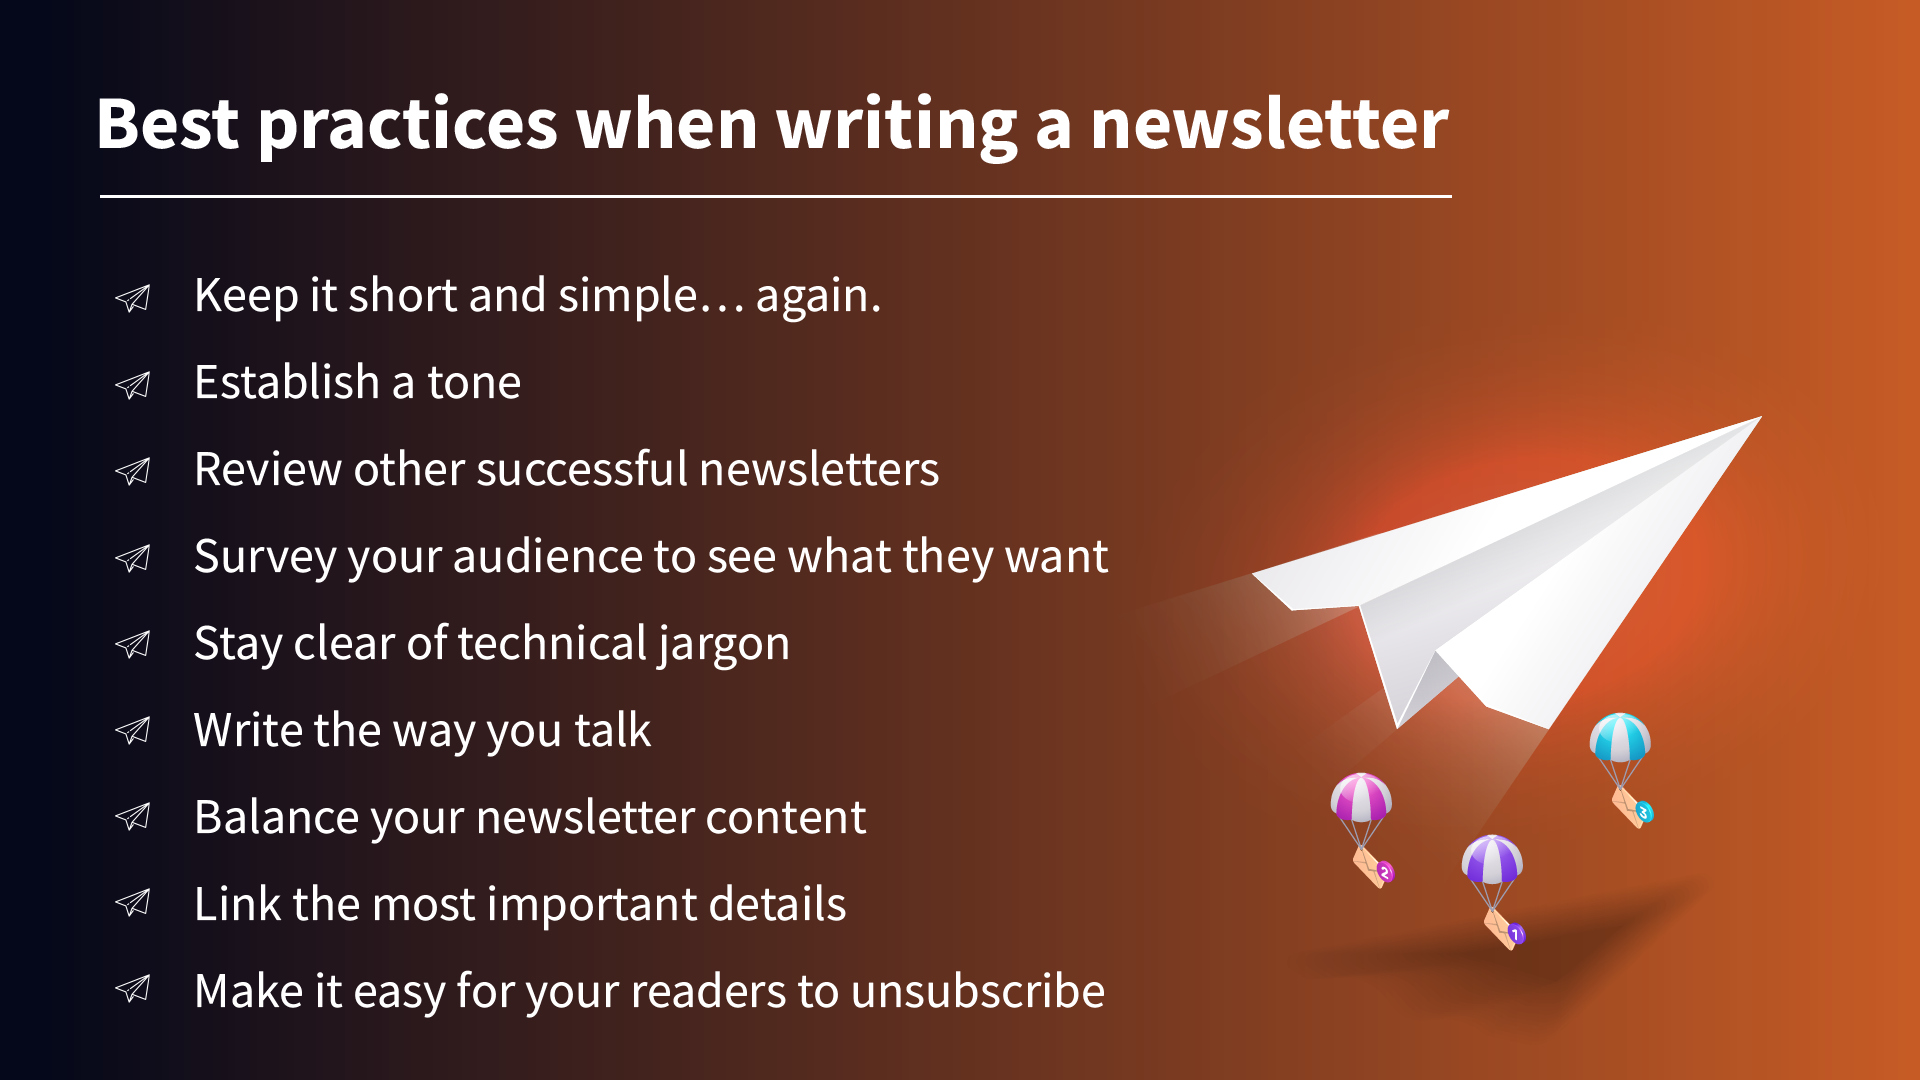 Best practices when writing a newsletter